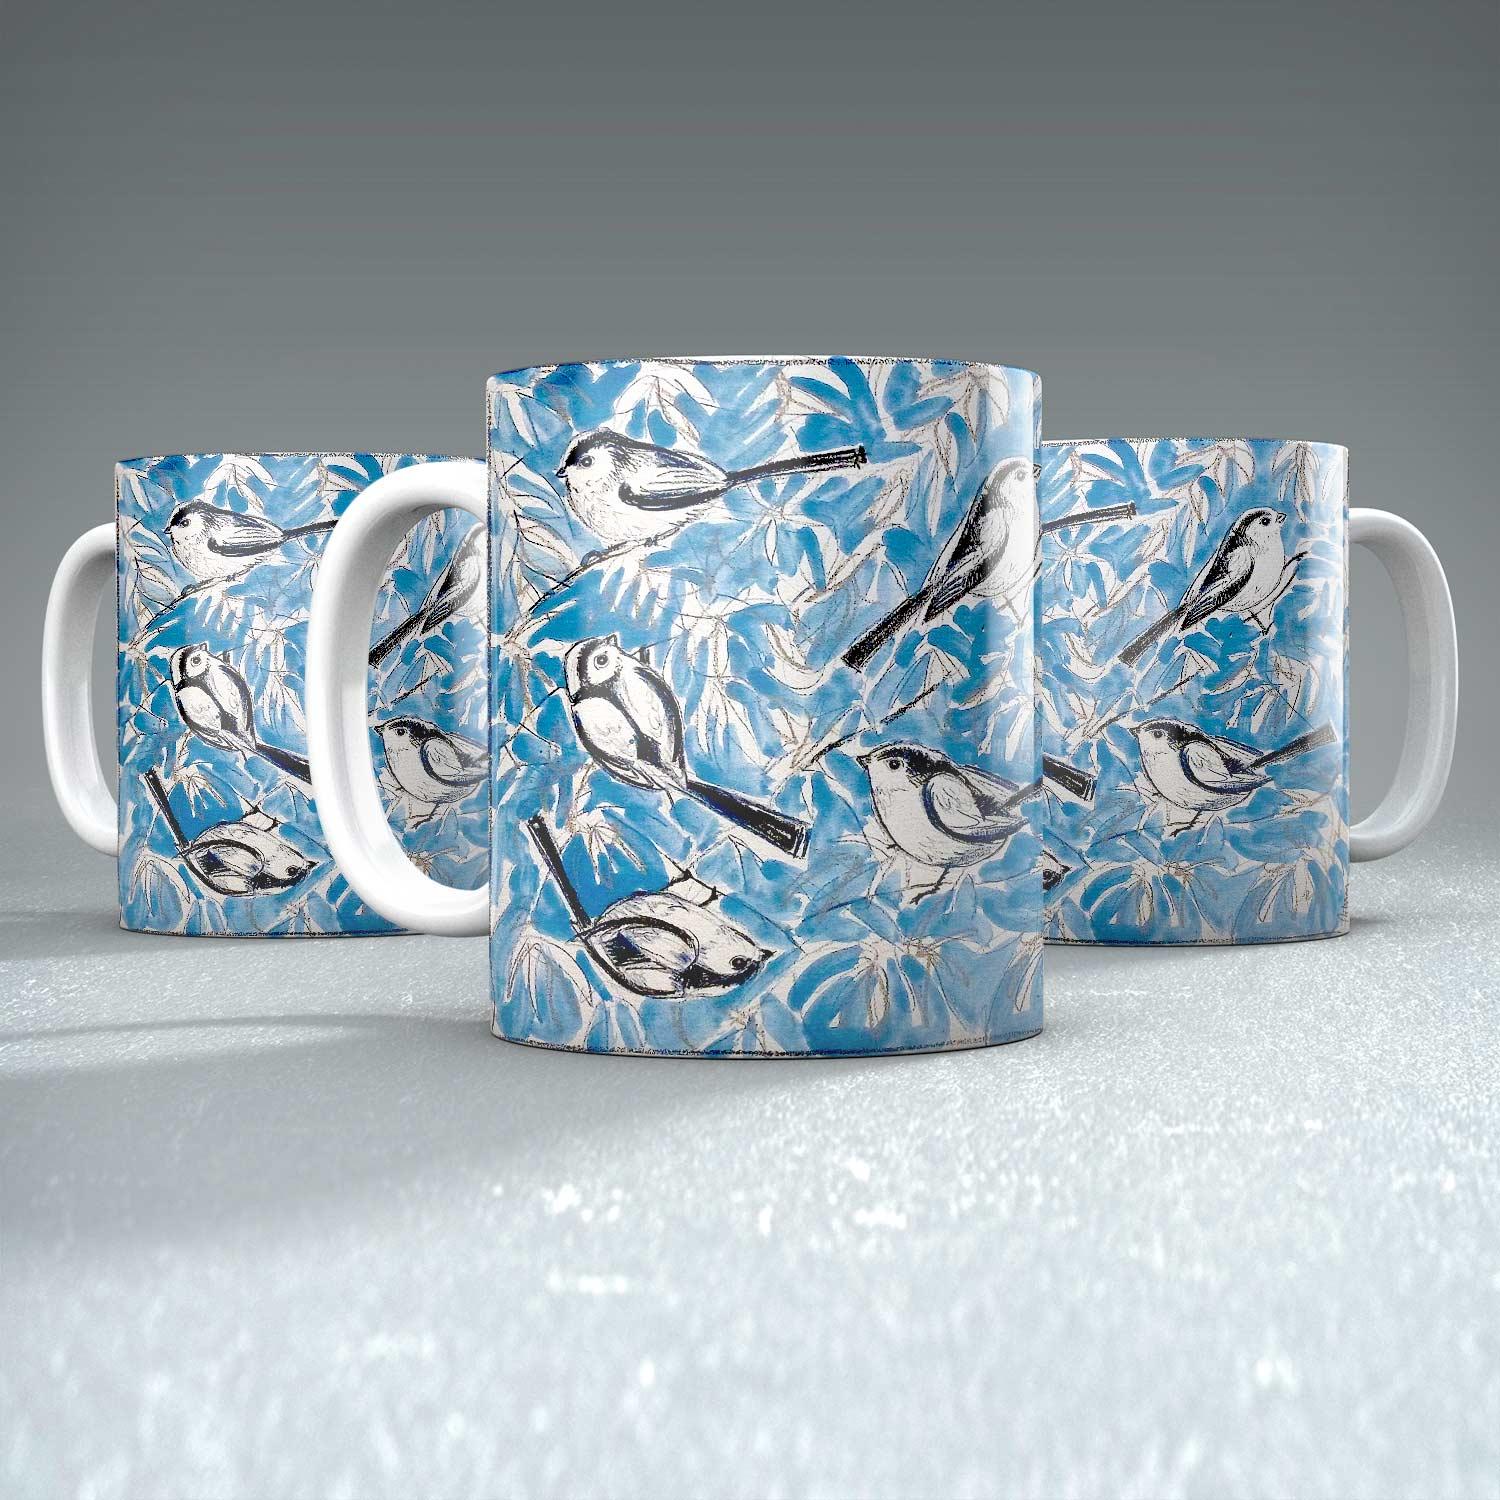 Blue White Acrobats Mug from an original painting by artist Ingrid Nilsson